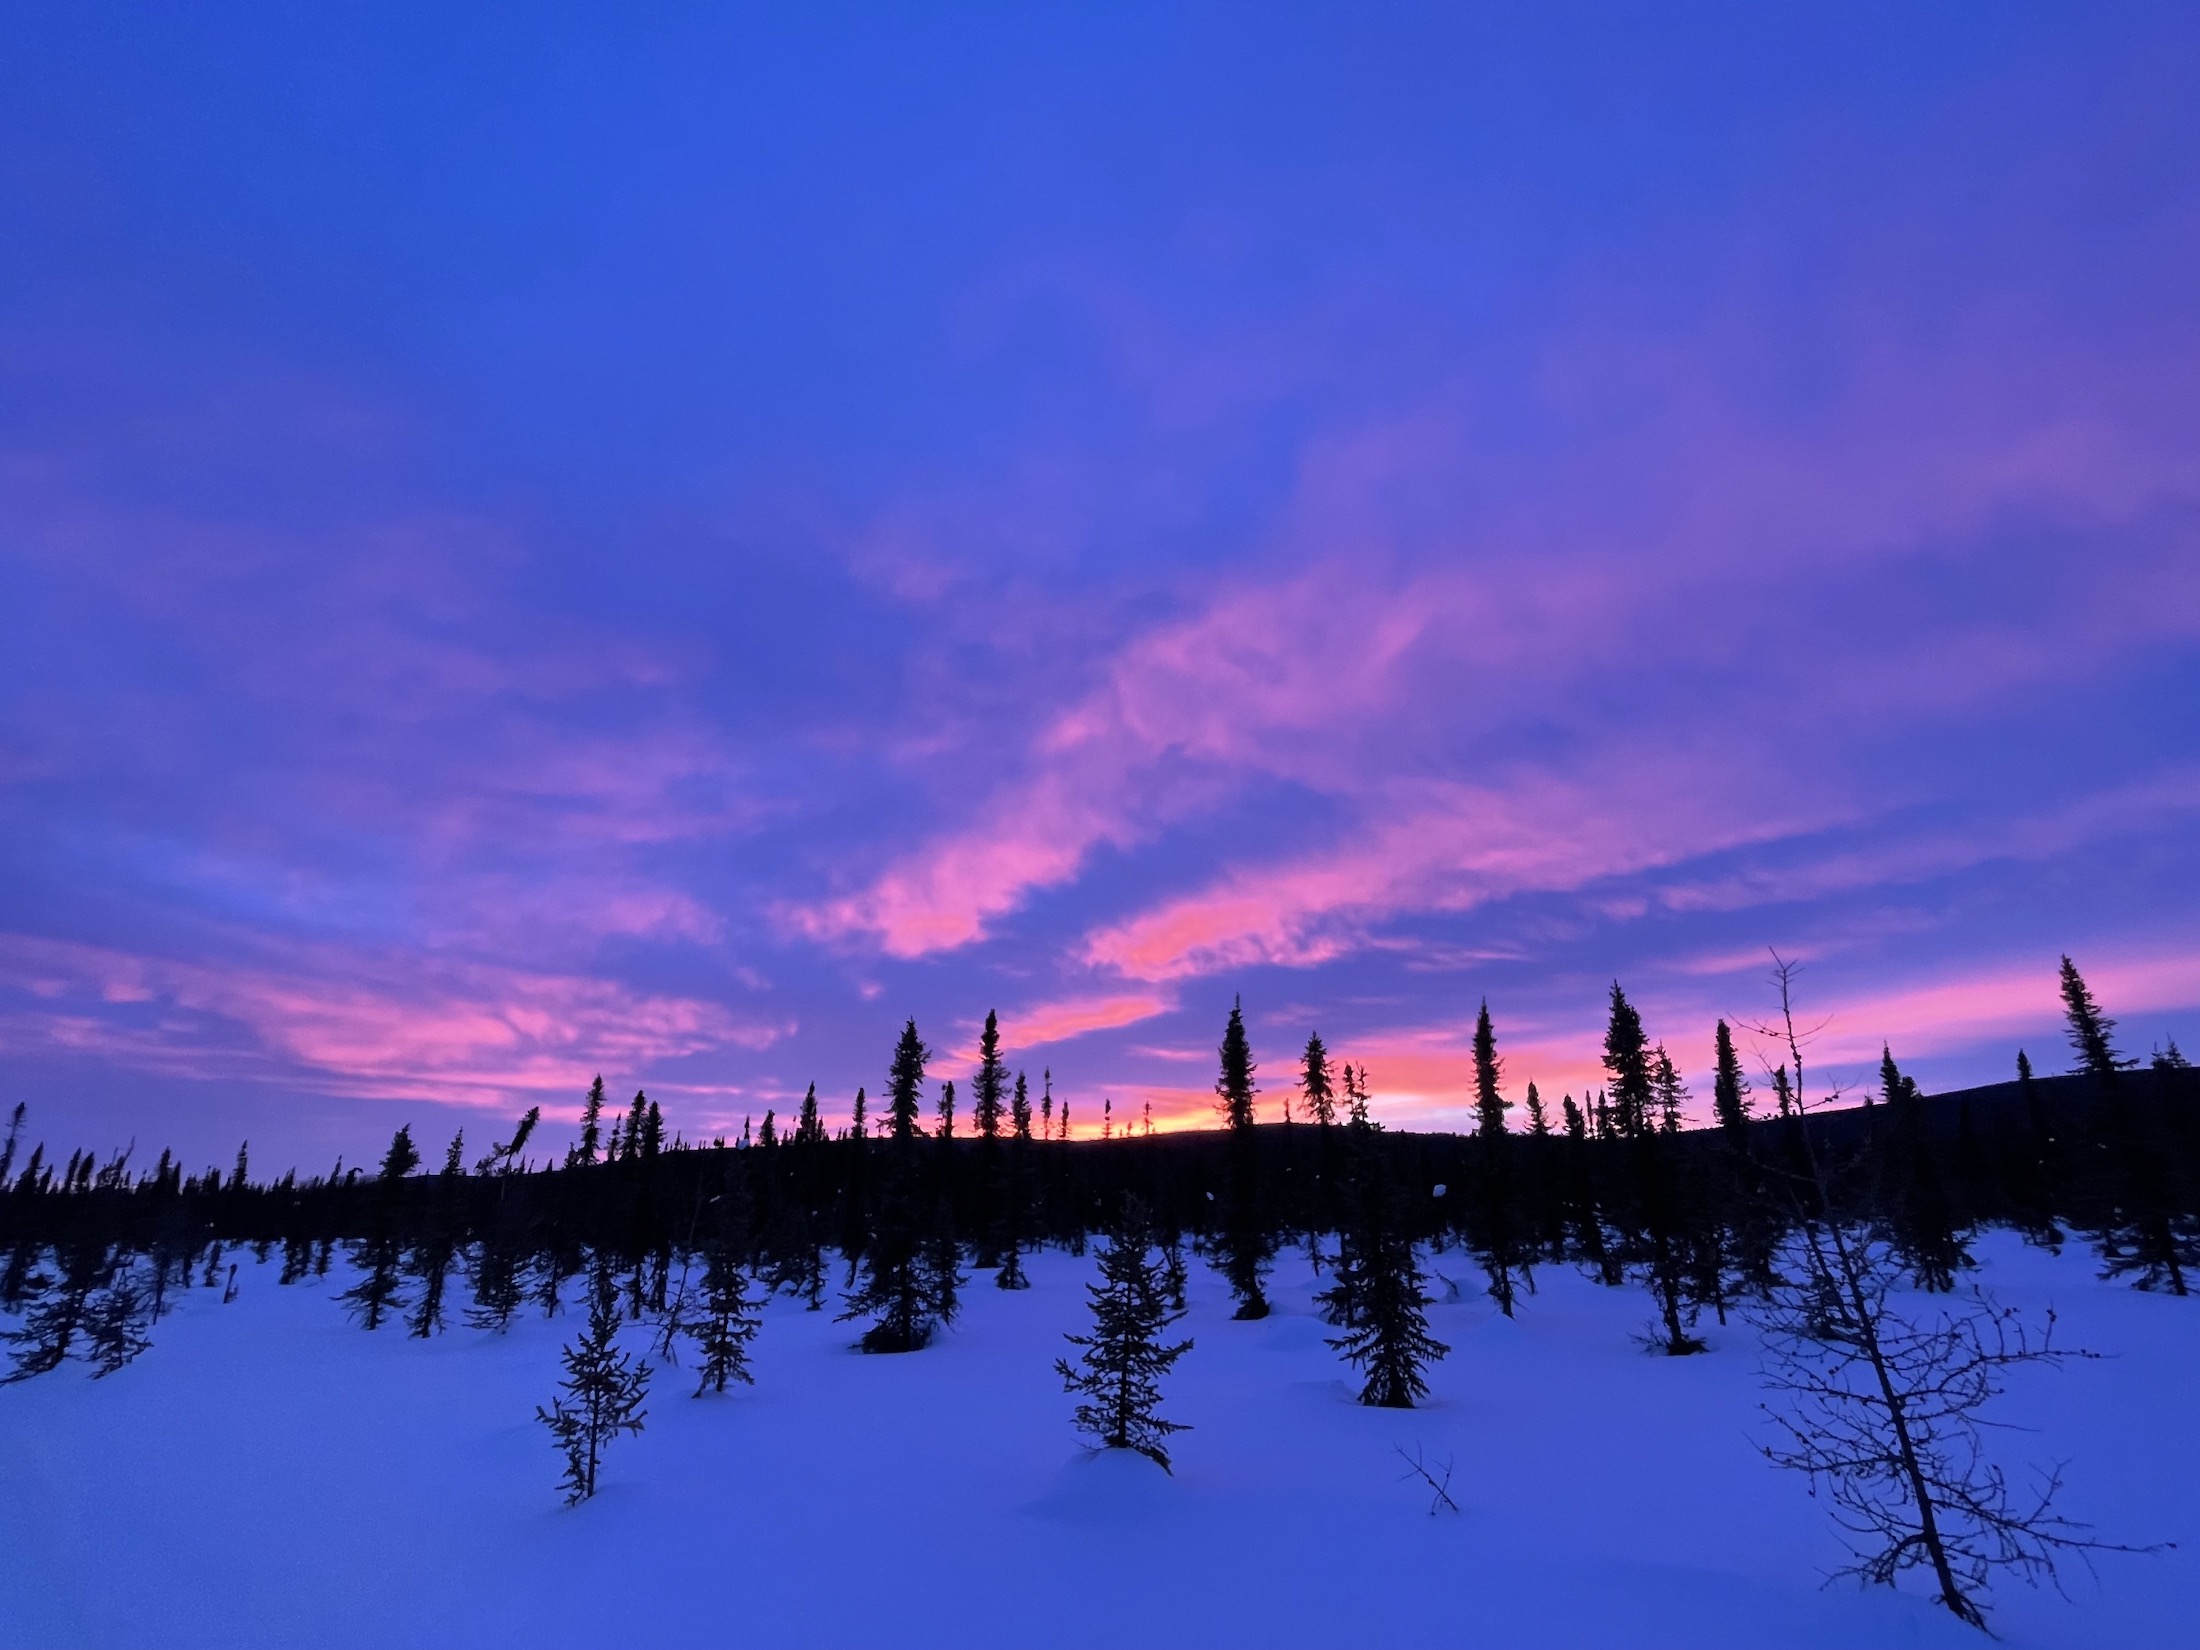 A sunset turns the undersides of clouds pink above a snowy hillside covered with small, widely spaced black spruce and tamarack trees.